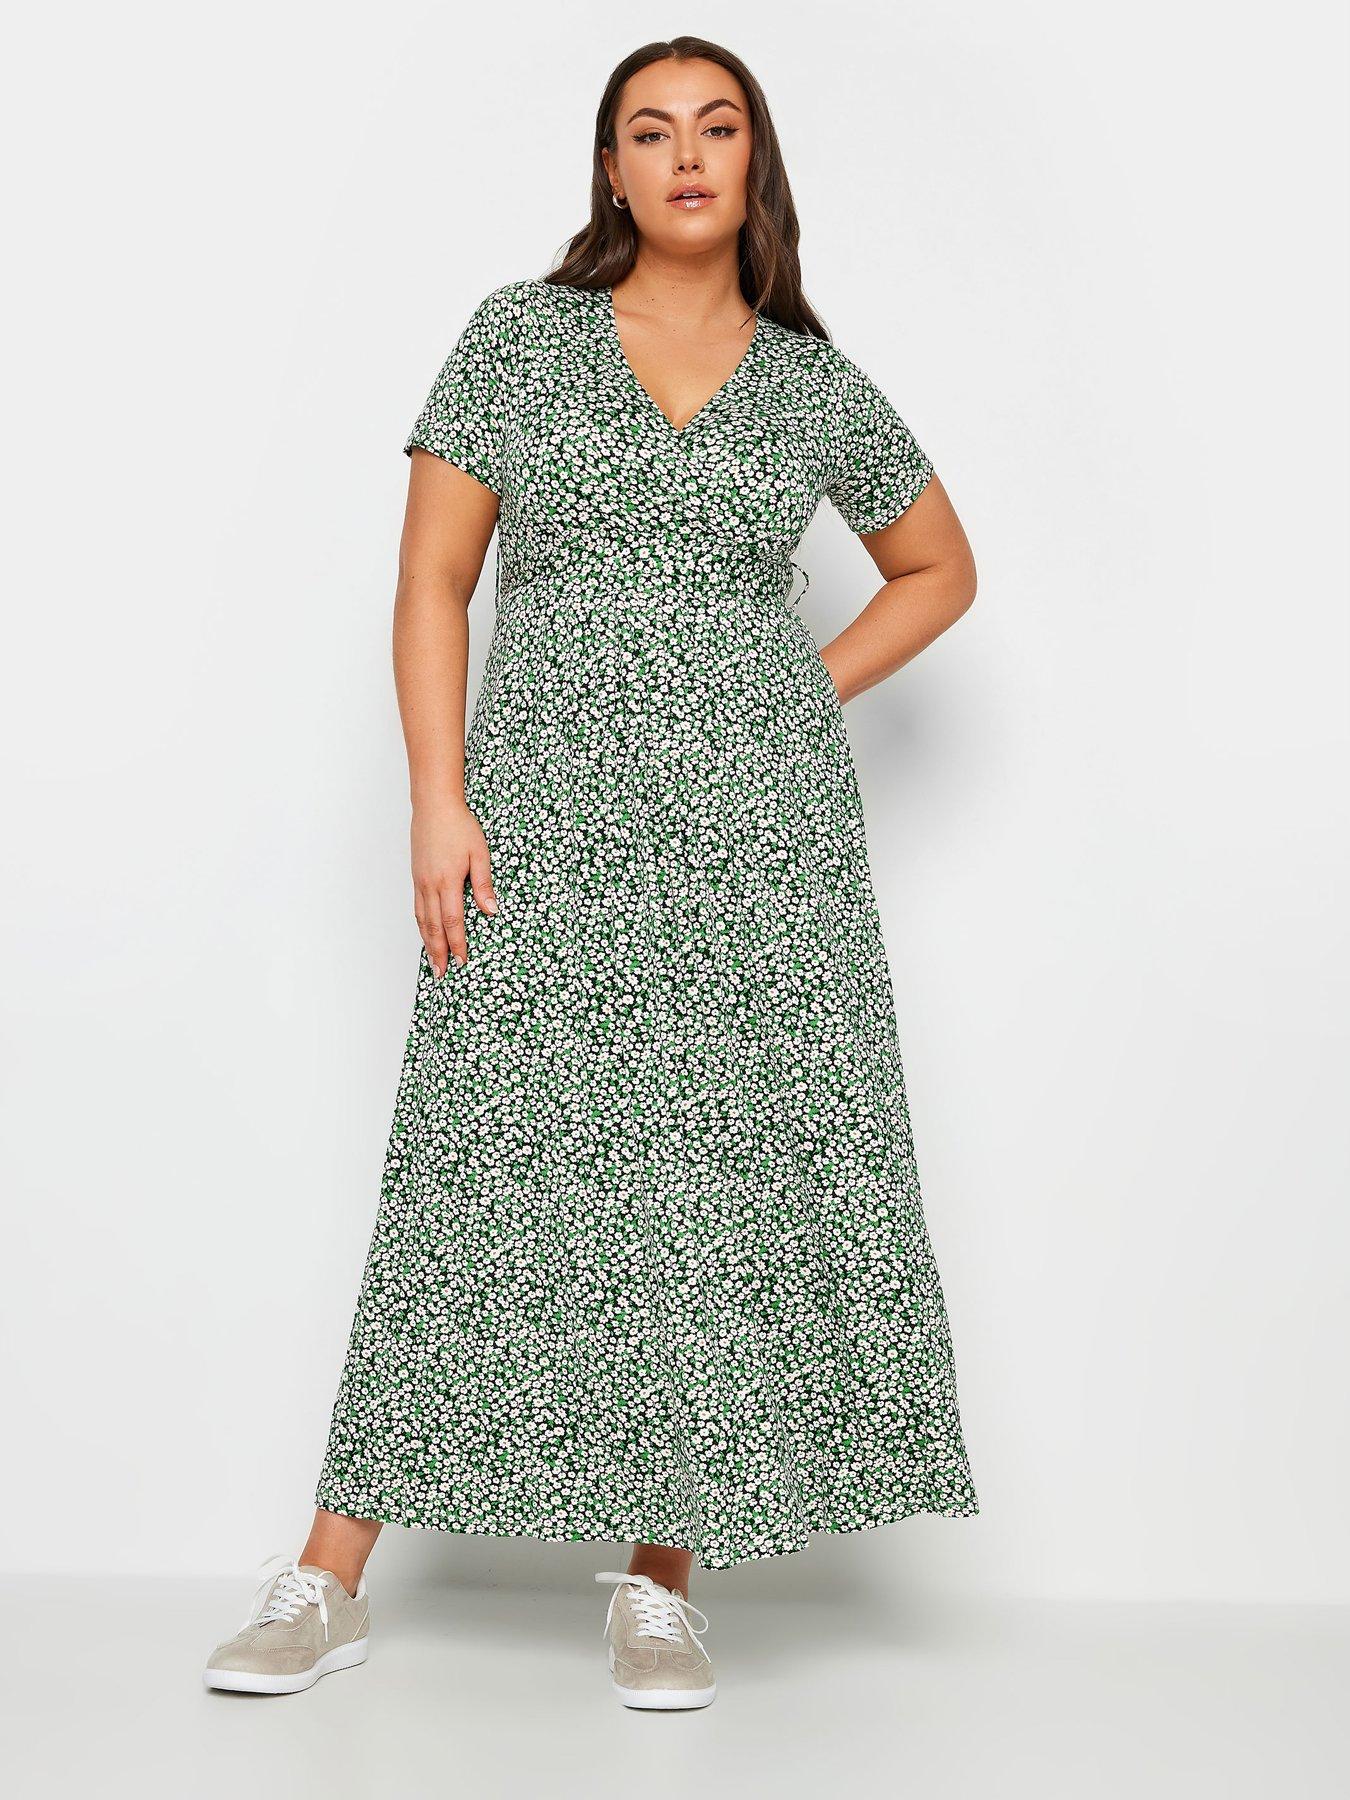 YOURS Plus Size Khaki Green Midaxi Knitted Jumper Dress